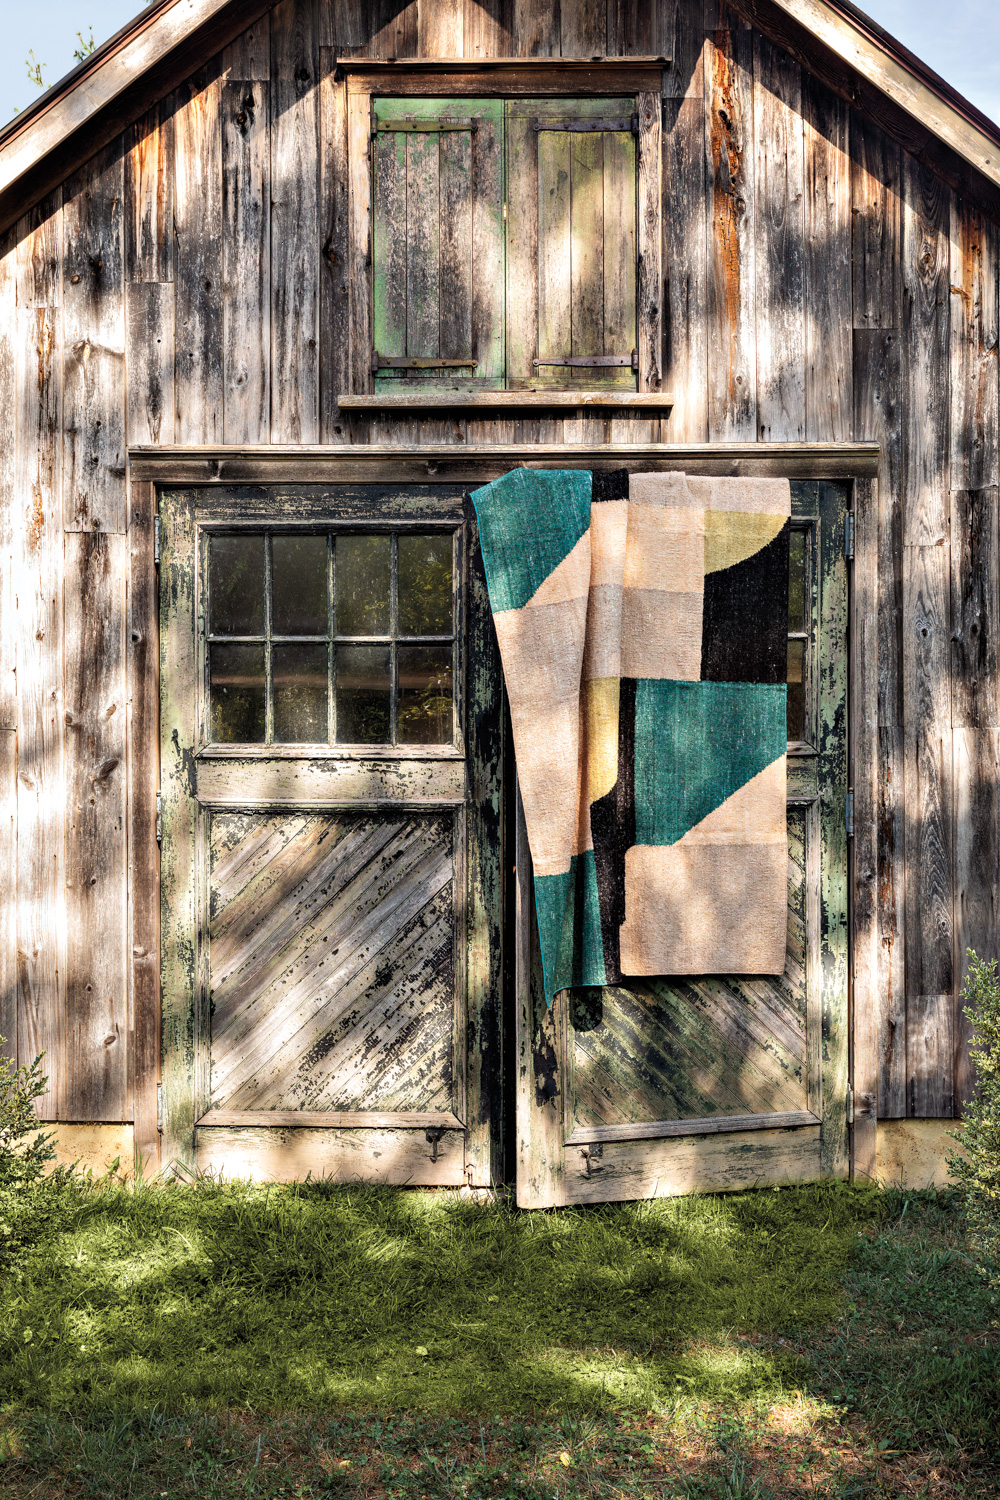 patchwork rug made from silk remnants hangs on a rustic barn window